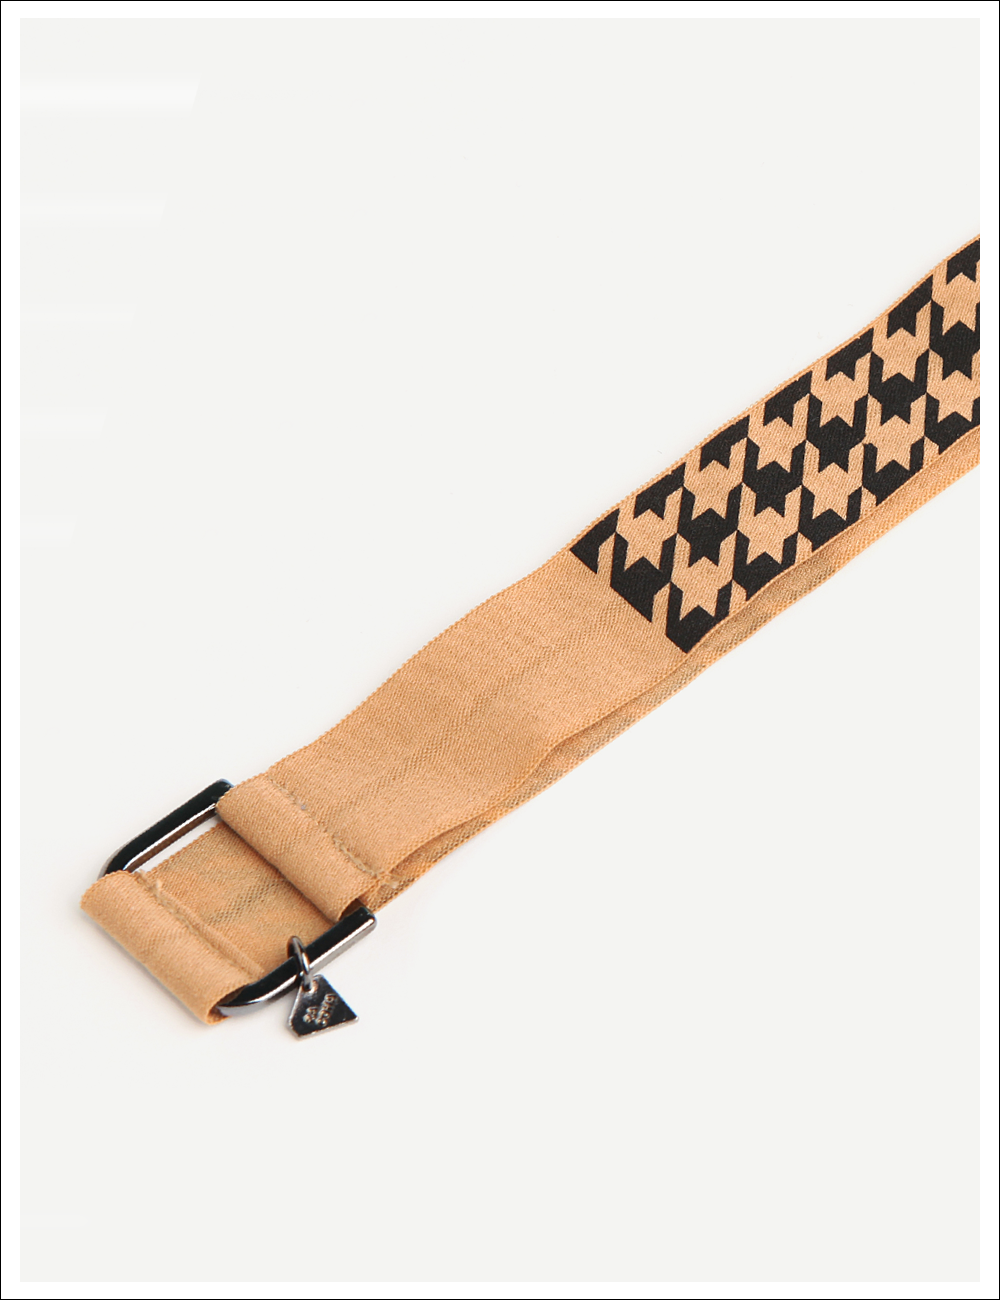 Hounds tooth Check Hair tie Band / Beige